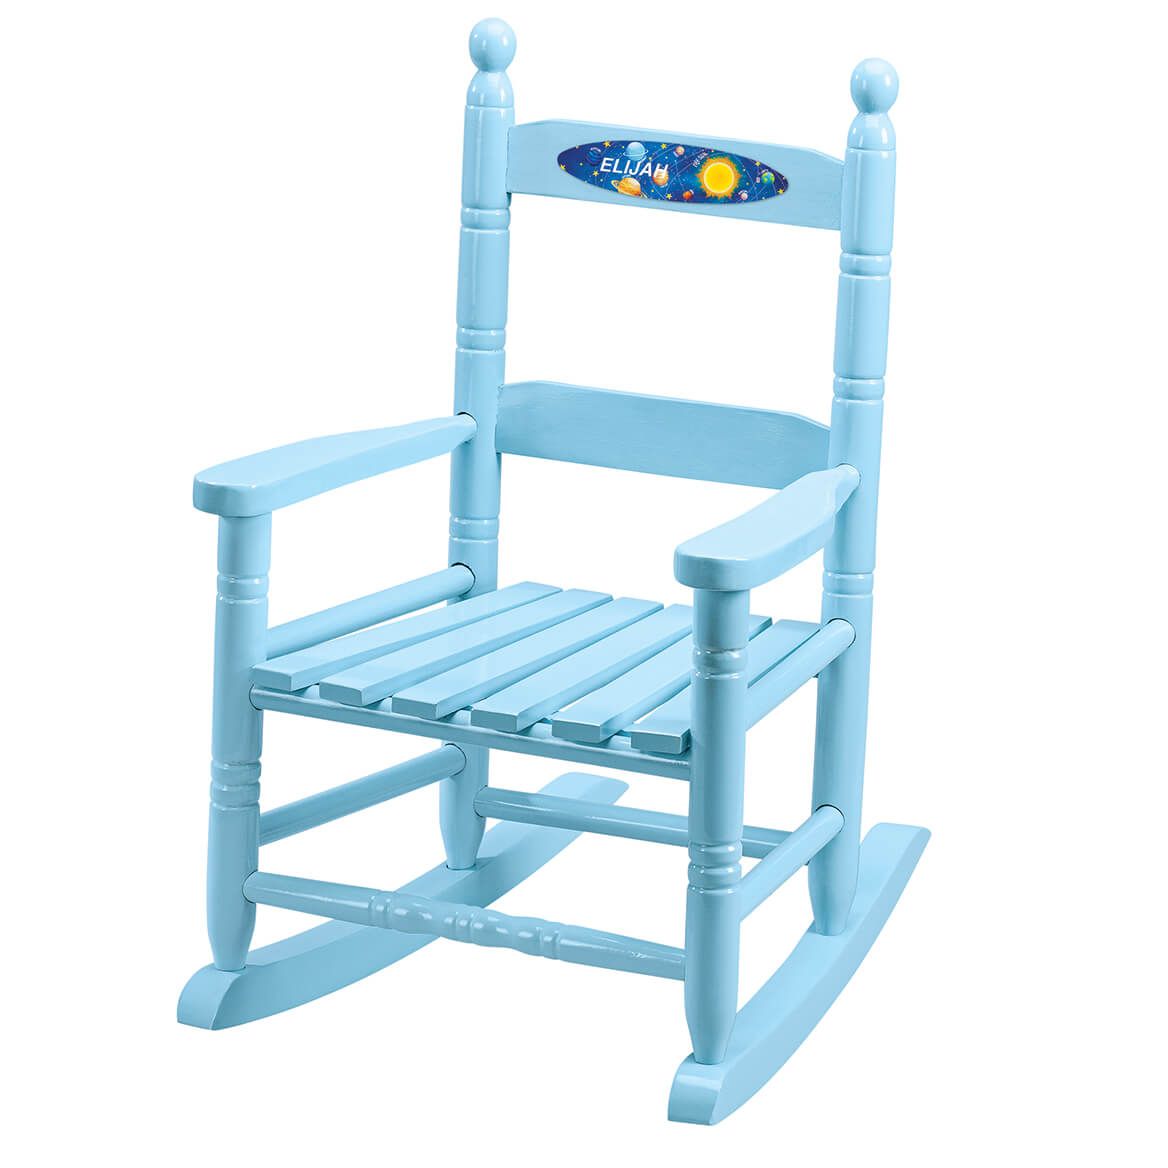 Personalized Space-Themed Children's Rocking Chair + '-' + 373932